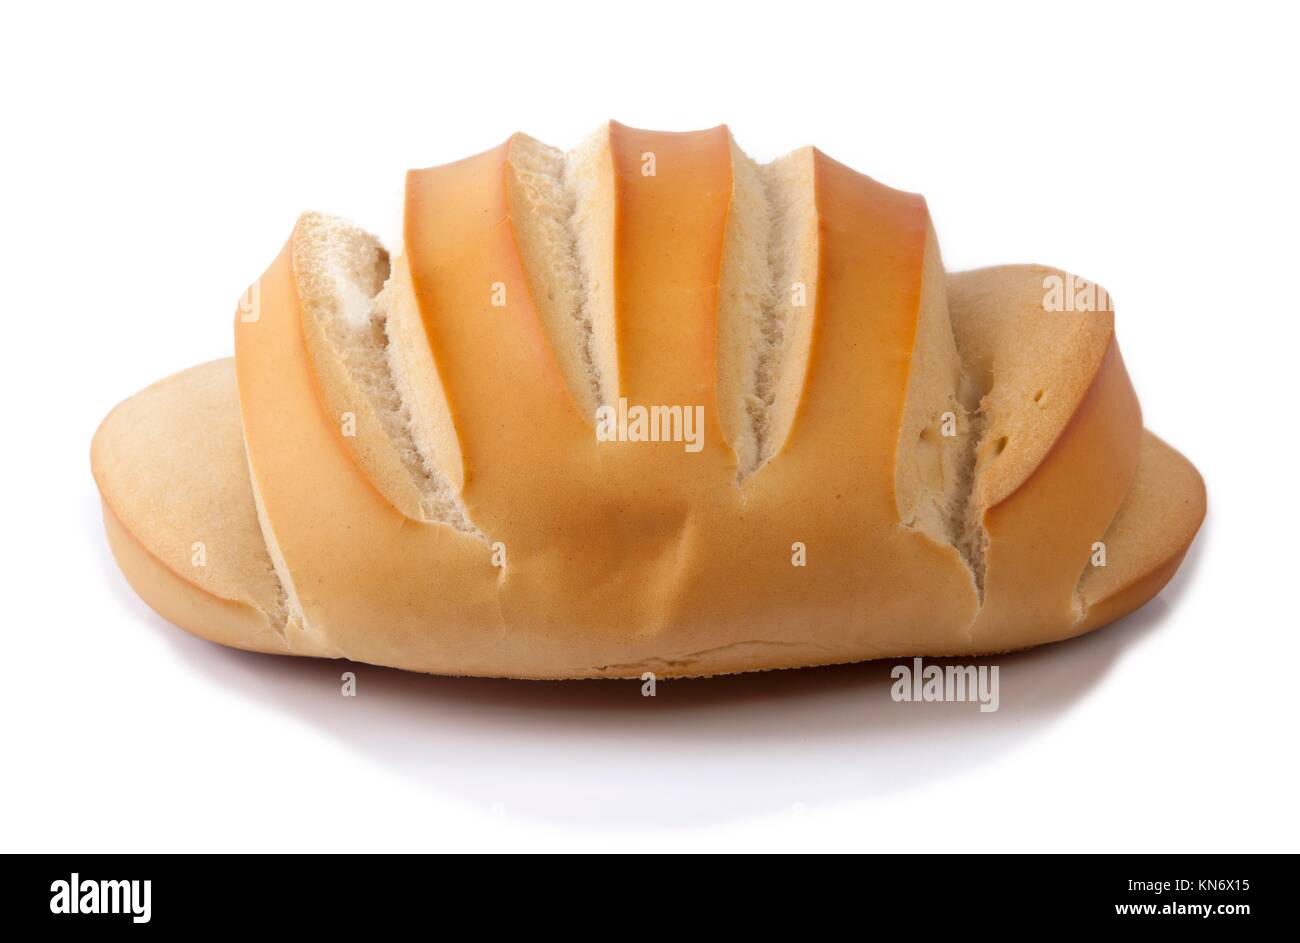 Spanish one kilo bread loaf. Isolated over white background. Side view. Stock Photo